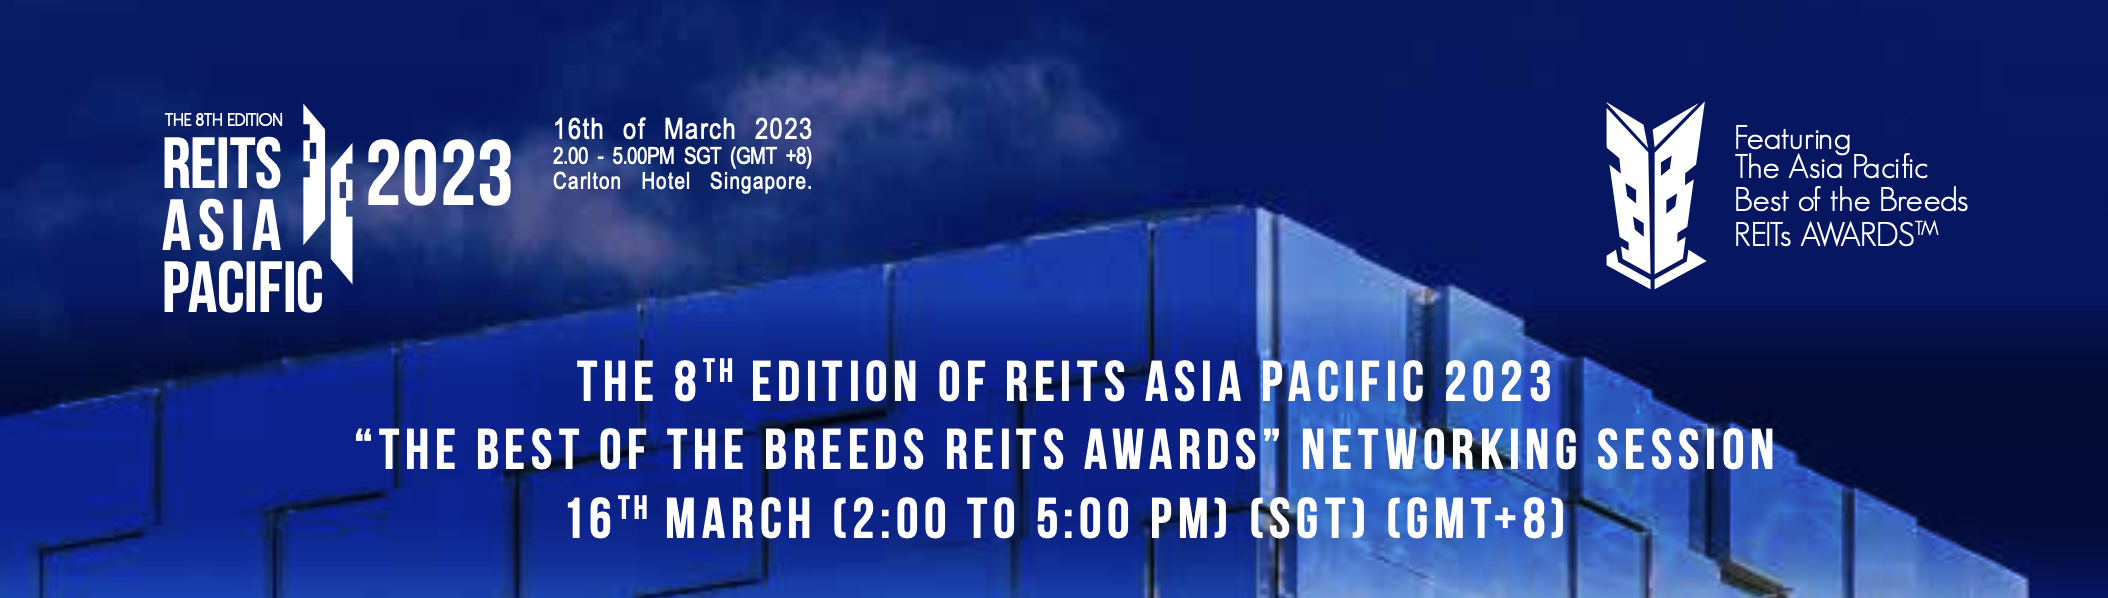 The 8th Edition of REITs Asia Pacific 2023 - 16 March (2.00 to 5.00pm SGT)